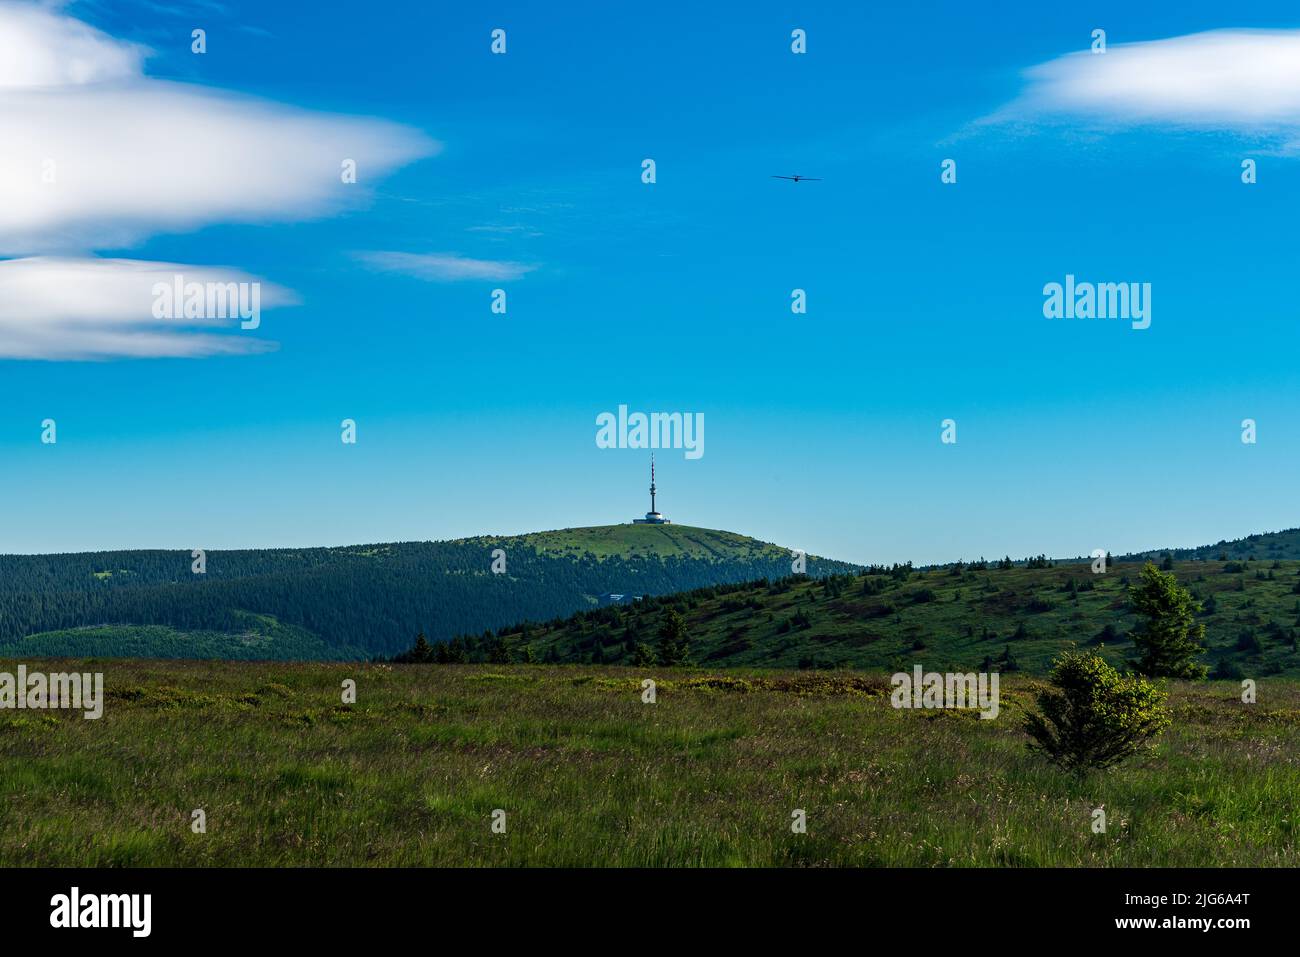 Praded hill with communication tower and airplane in sky above in Jeseniky mountains in Czech republic Stock Photo